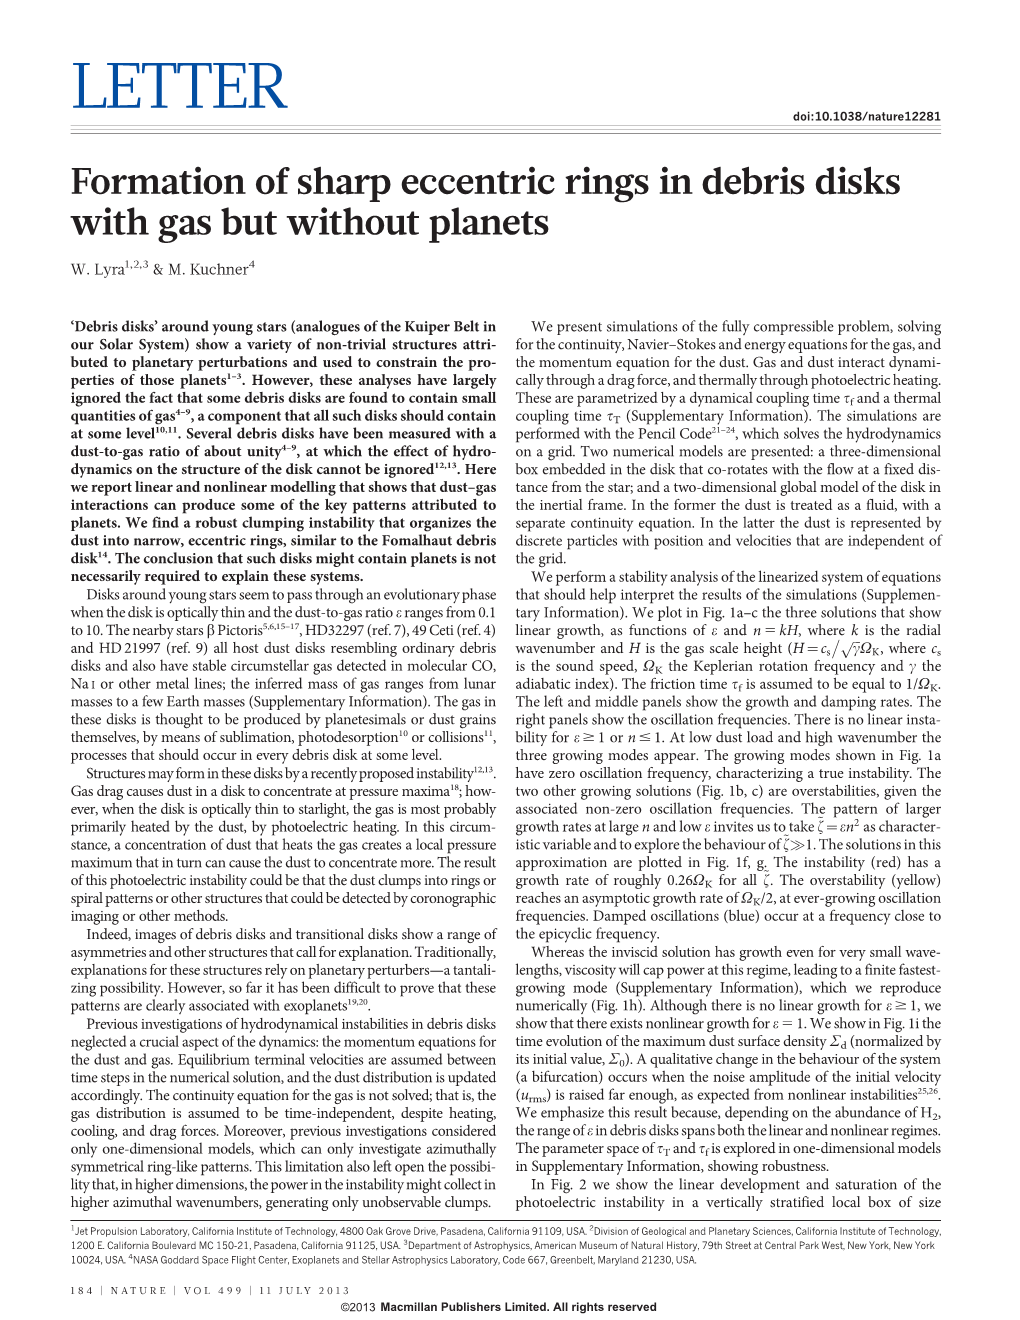 Formation of Sharp Eccentric Rings in Debris Disks with Gas but Without Planets